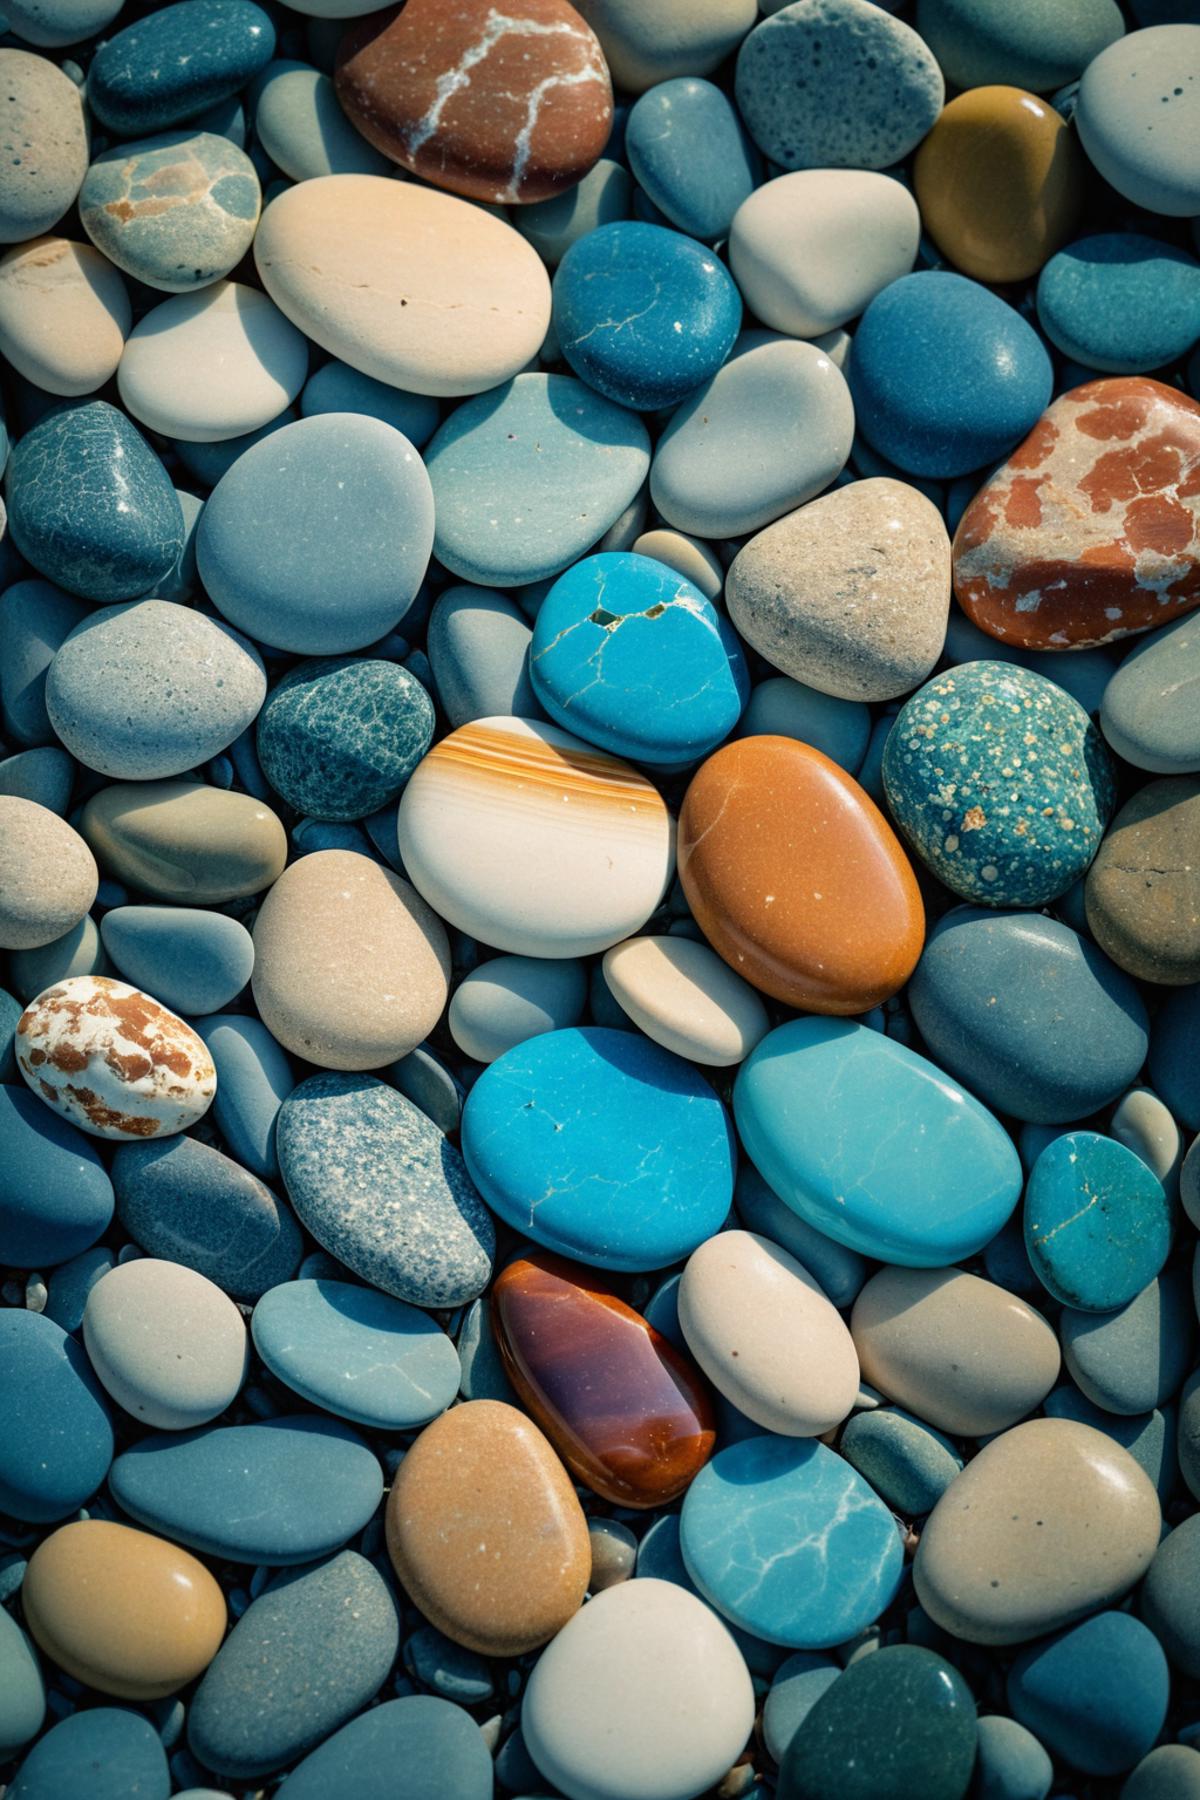 A pile of colorful rocks with a blue and orange rock standing out.